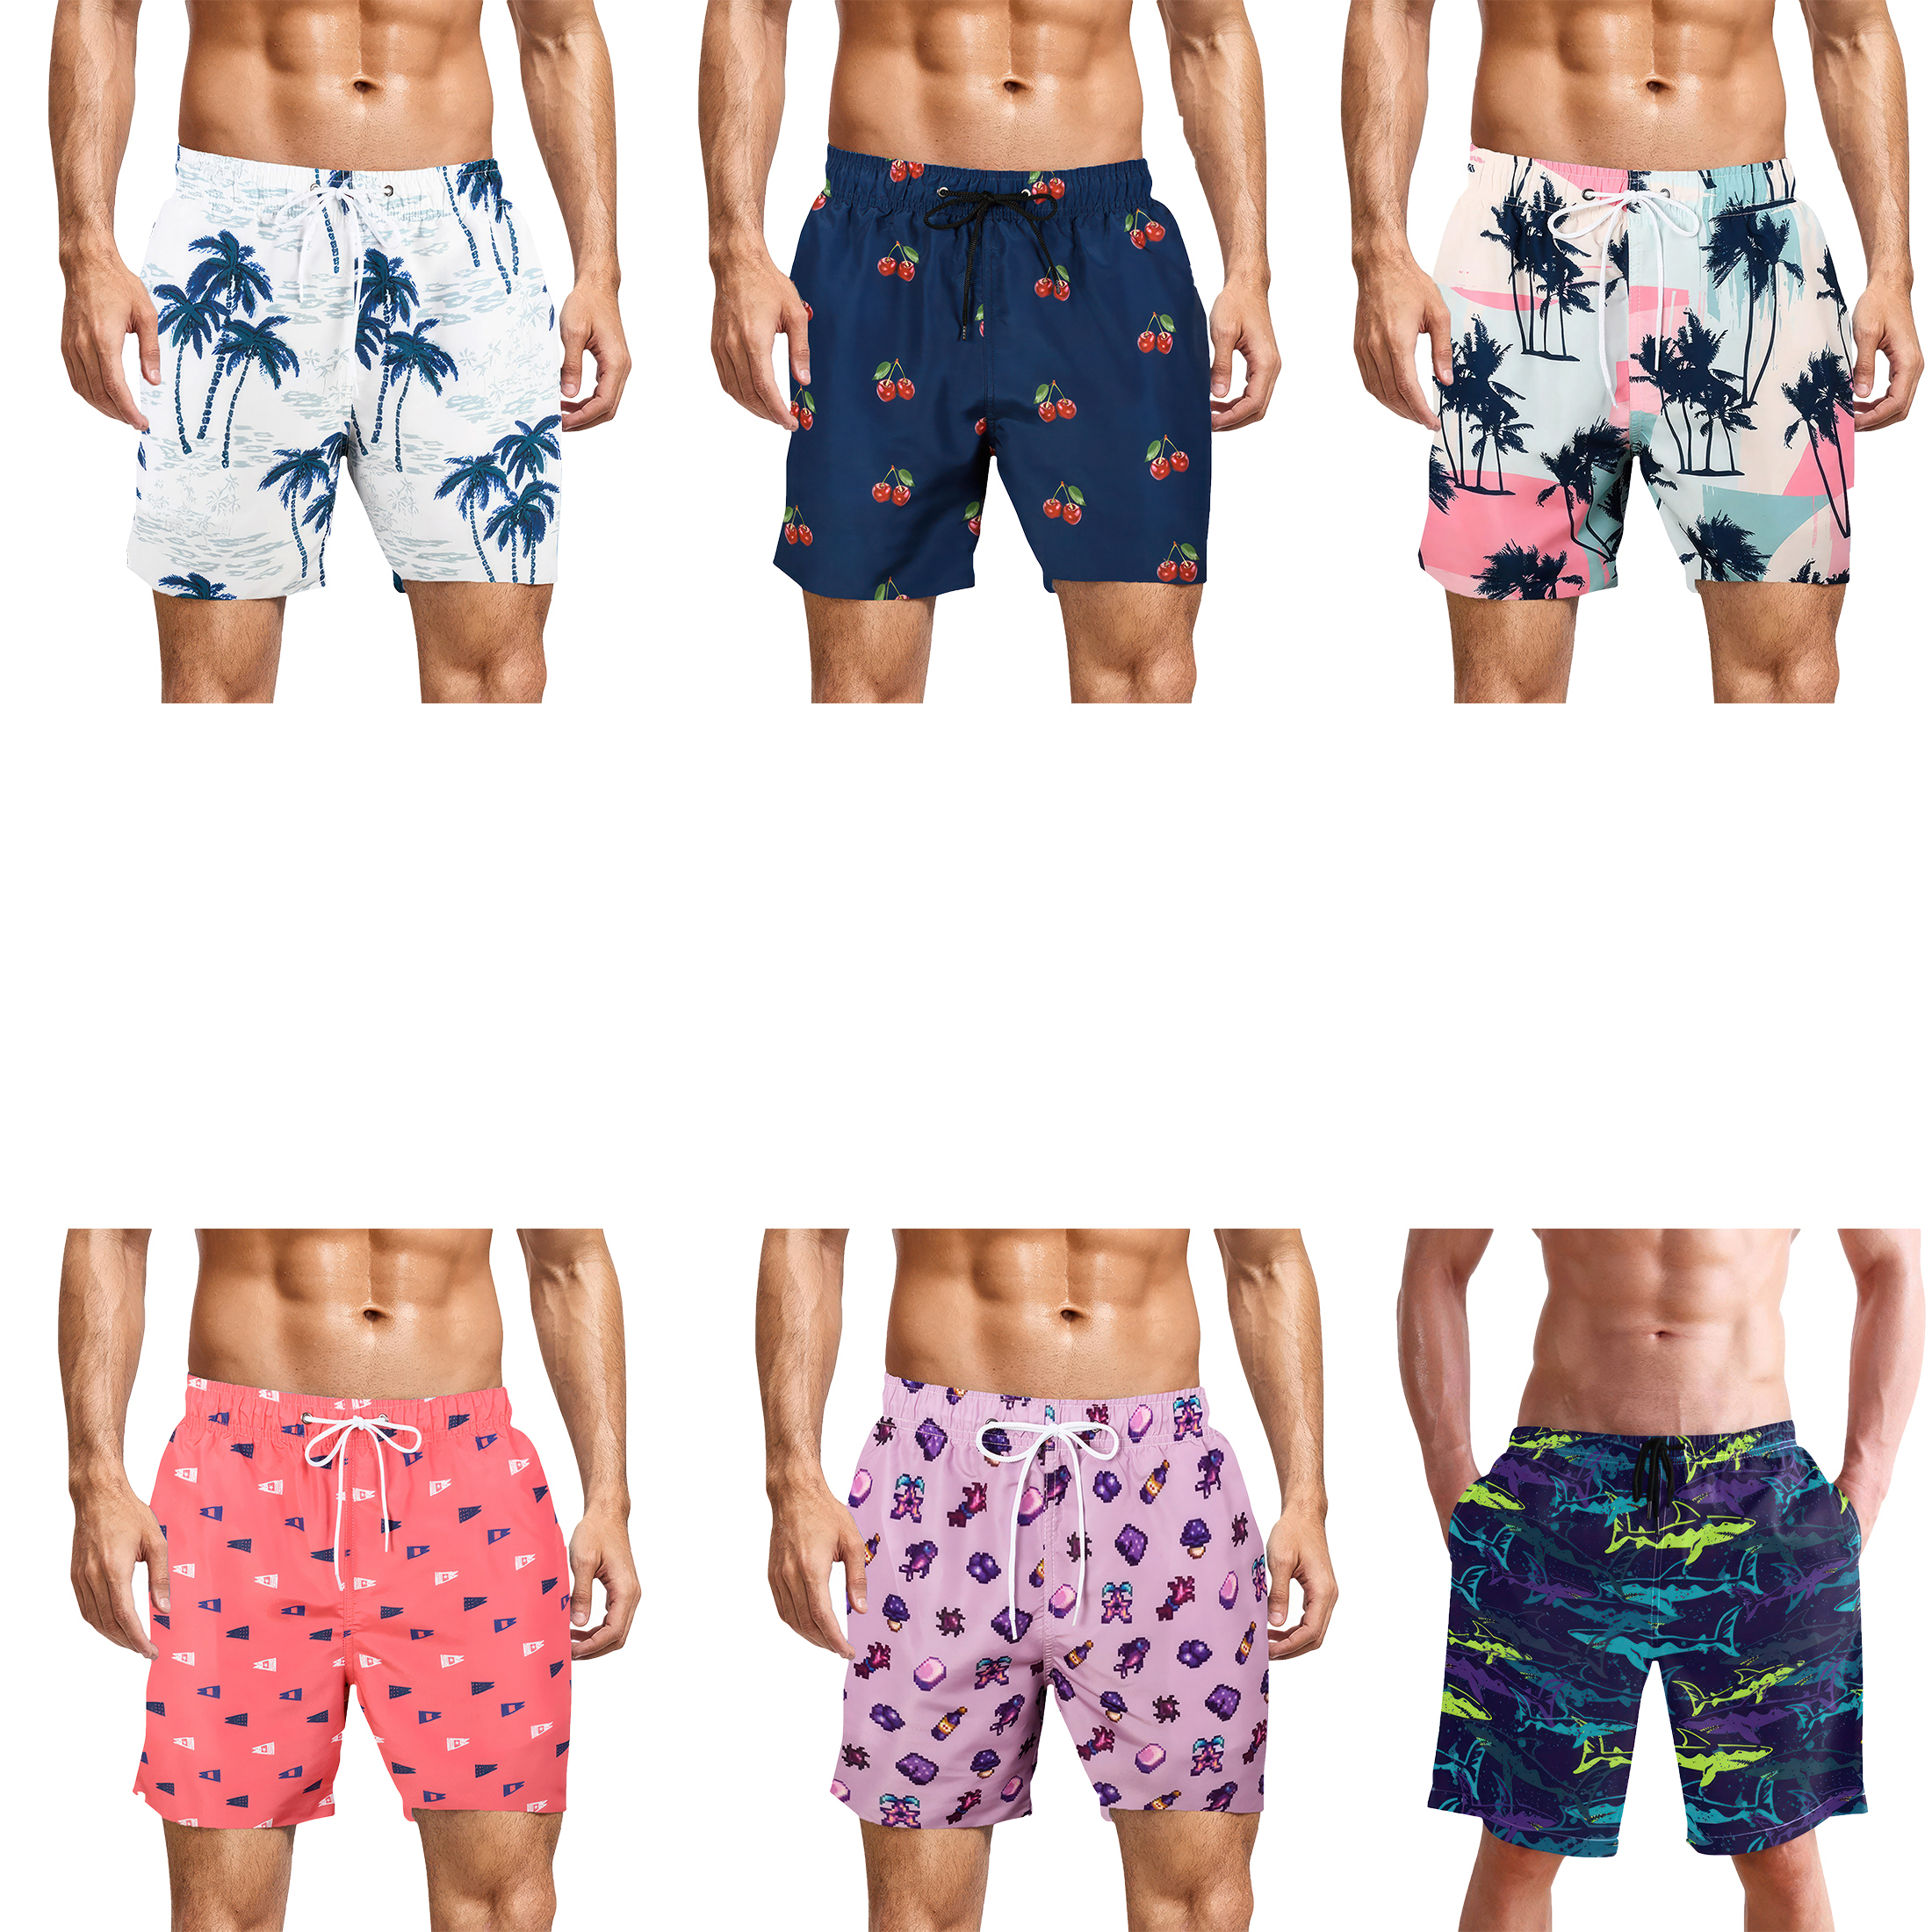 3-Pack Men's Printed Swim Shorts With Pockets Quick Dry Beachwear Bathing Suits Board Trunks - M